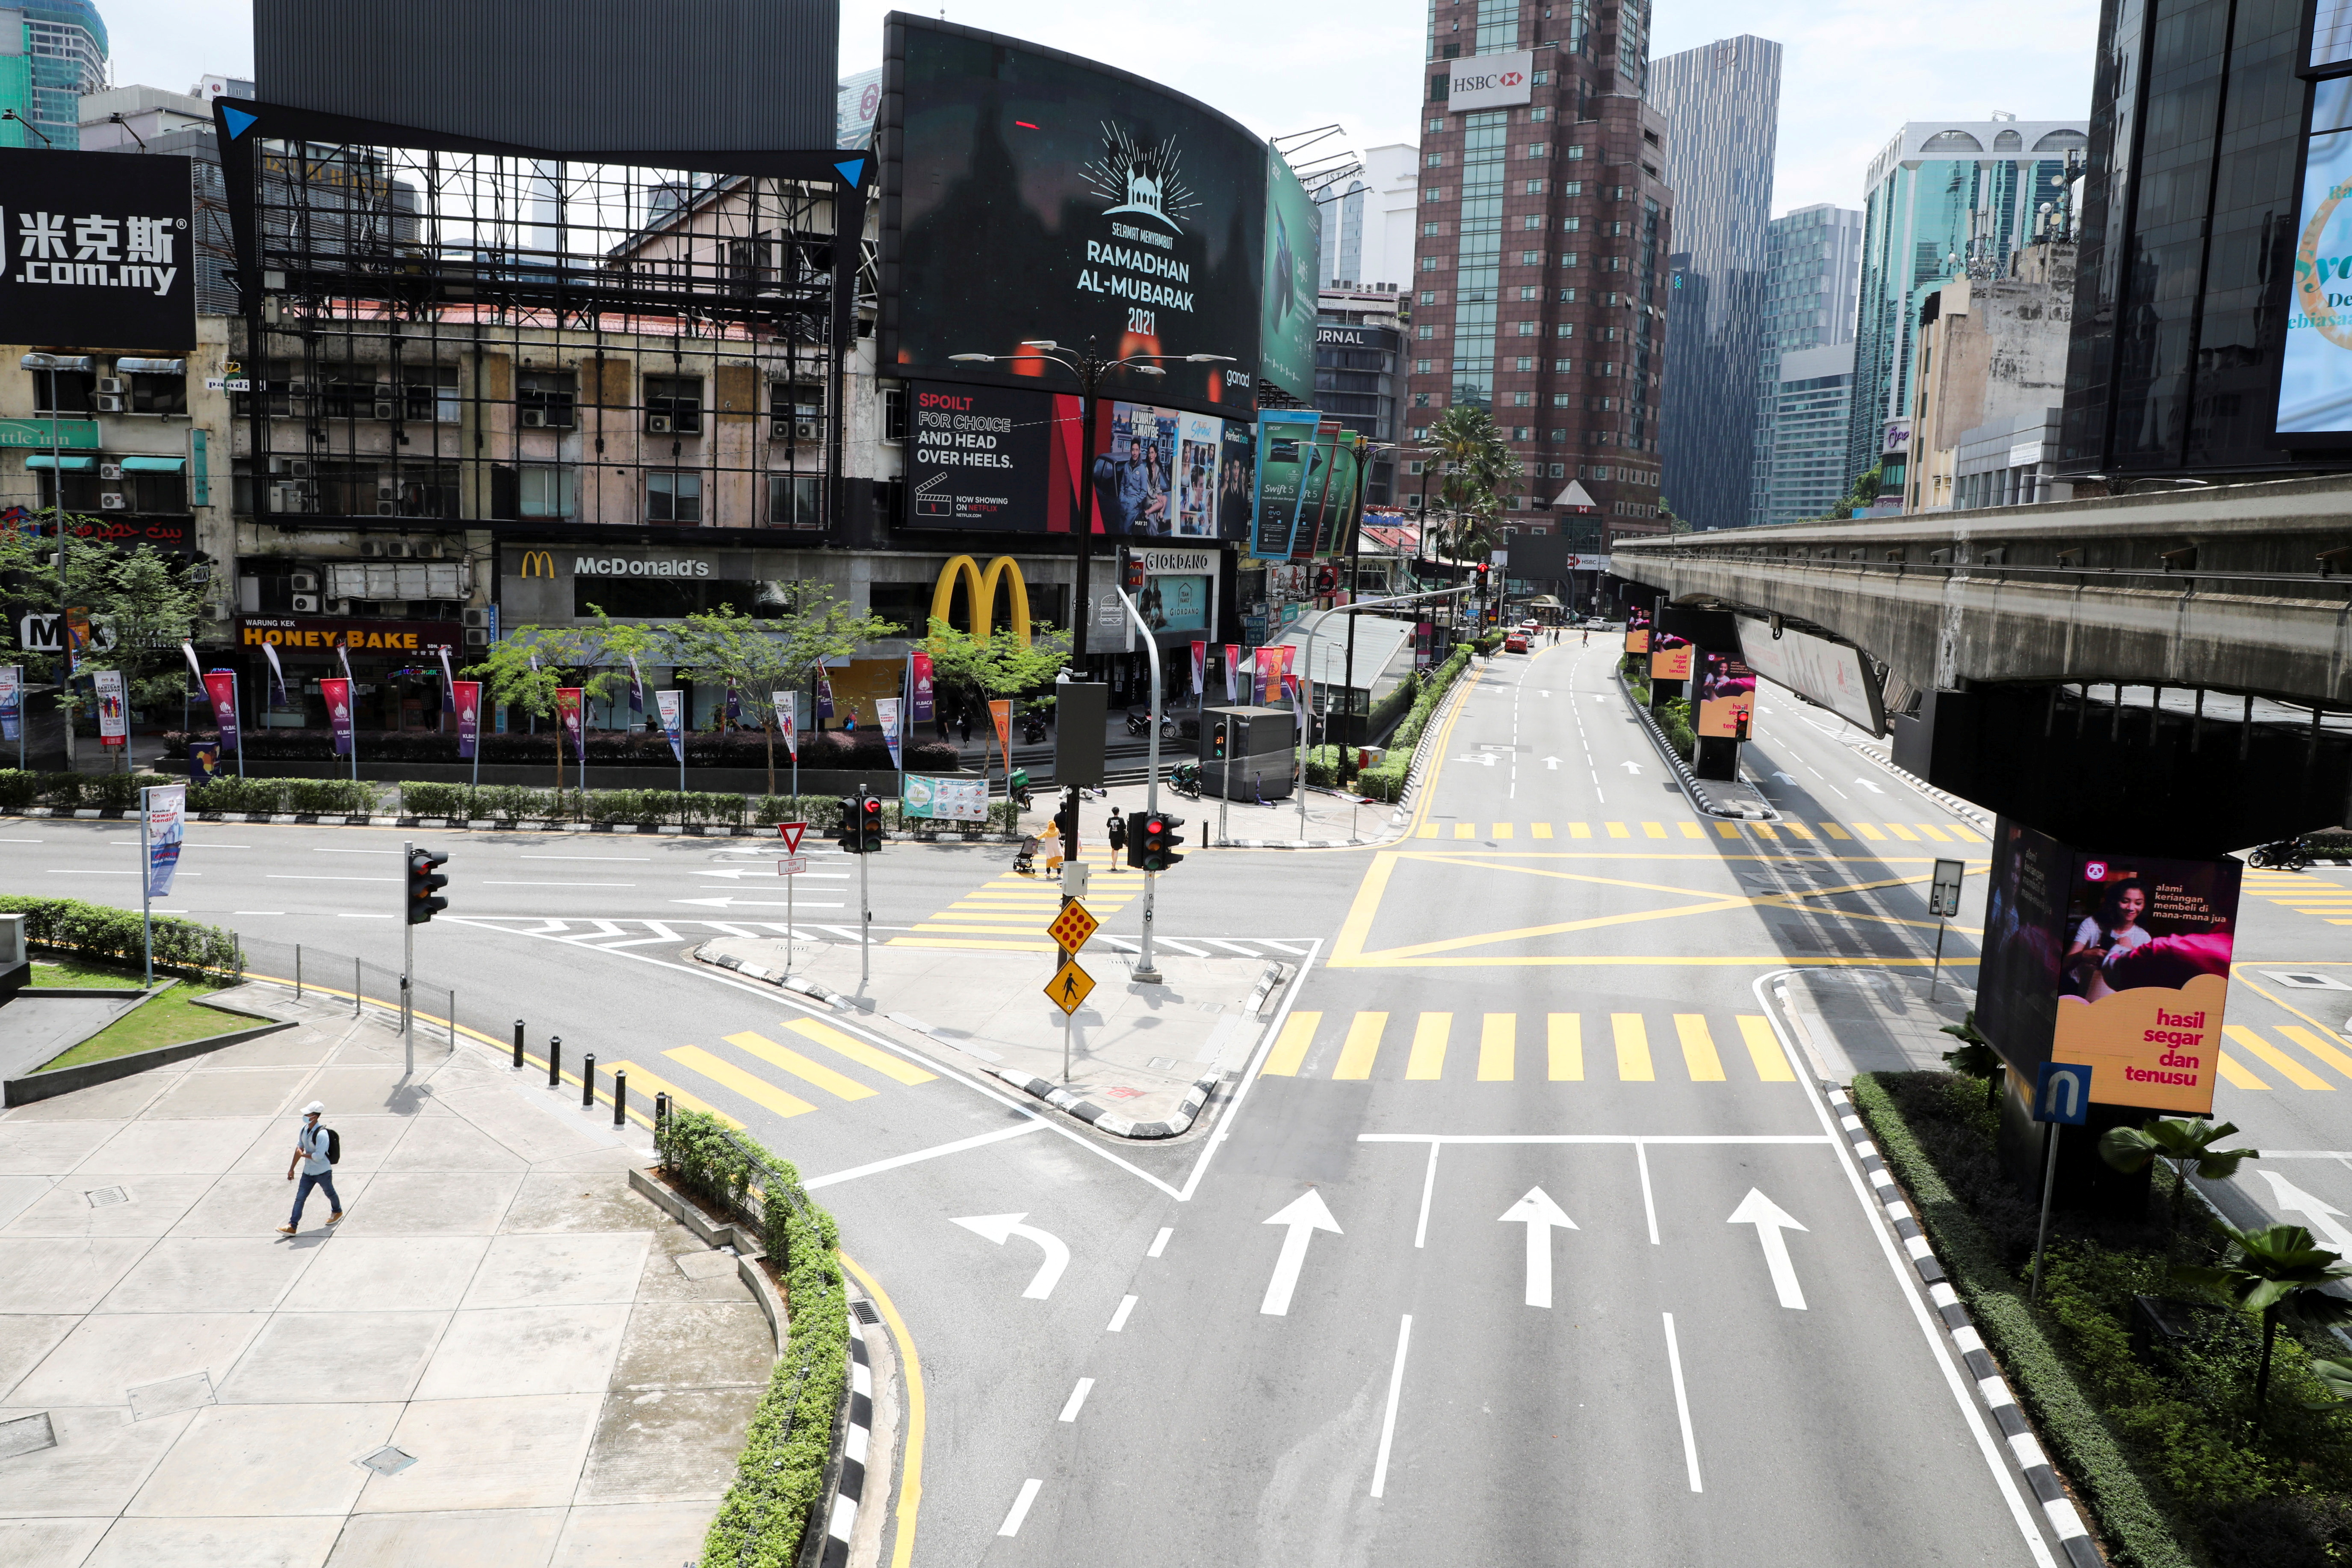 General view of a deserted street during a lockdown due to the COVID-19 pandemic, in Kuala Lumpur